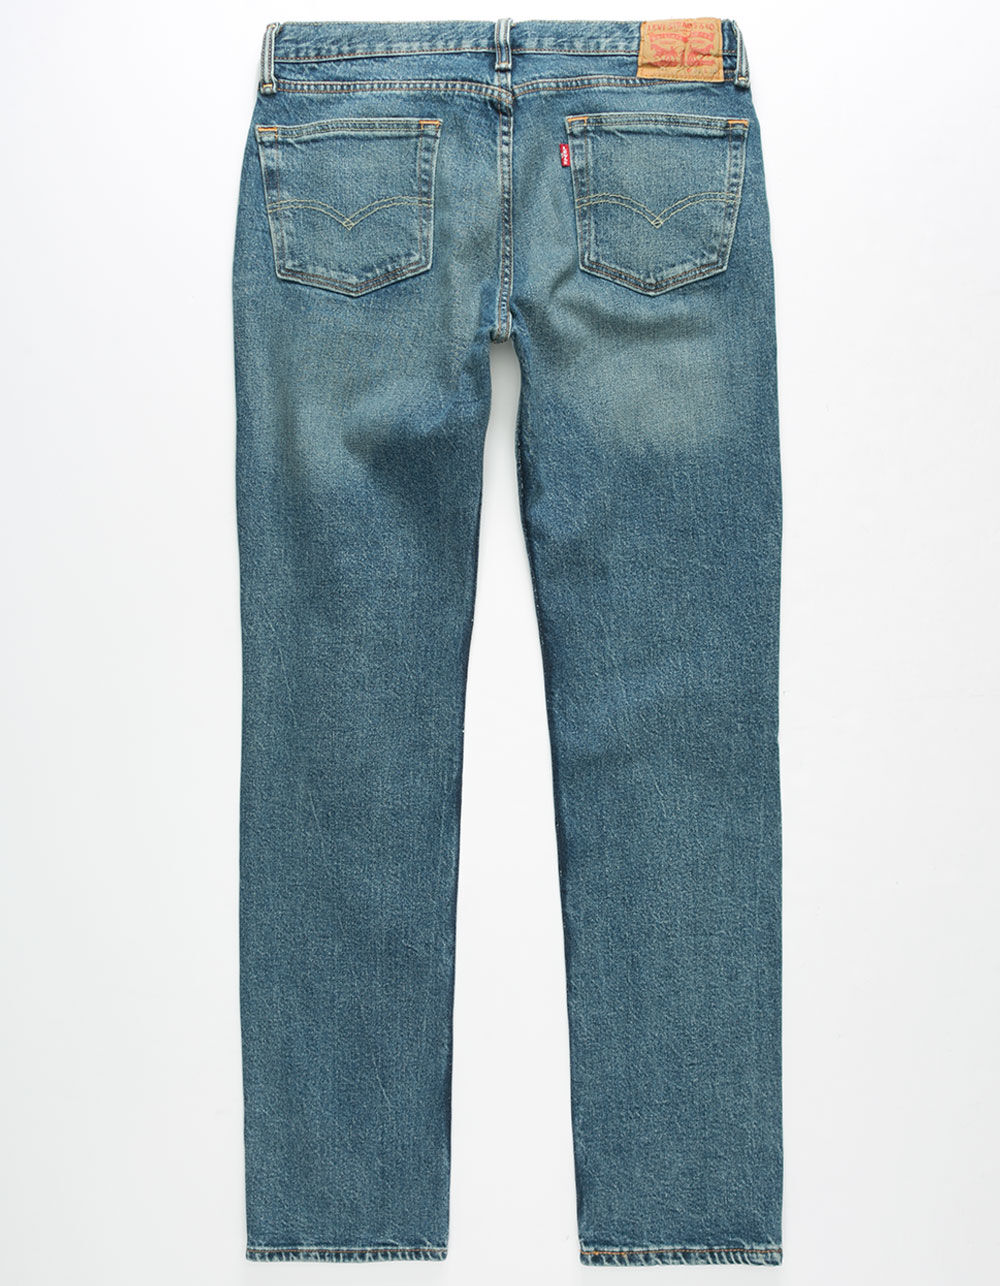 LEVI'S 511 Mens Slim Ripped Jeans image number 4